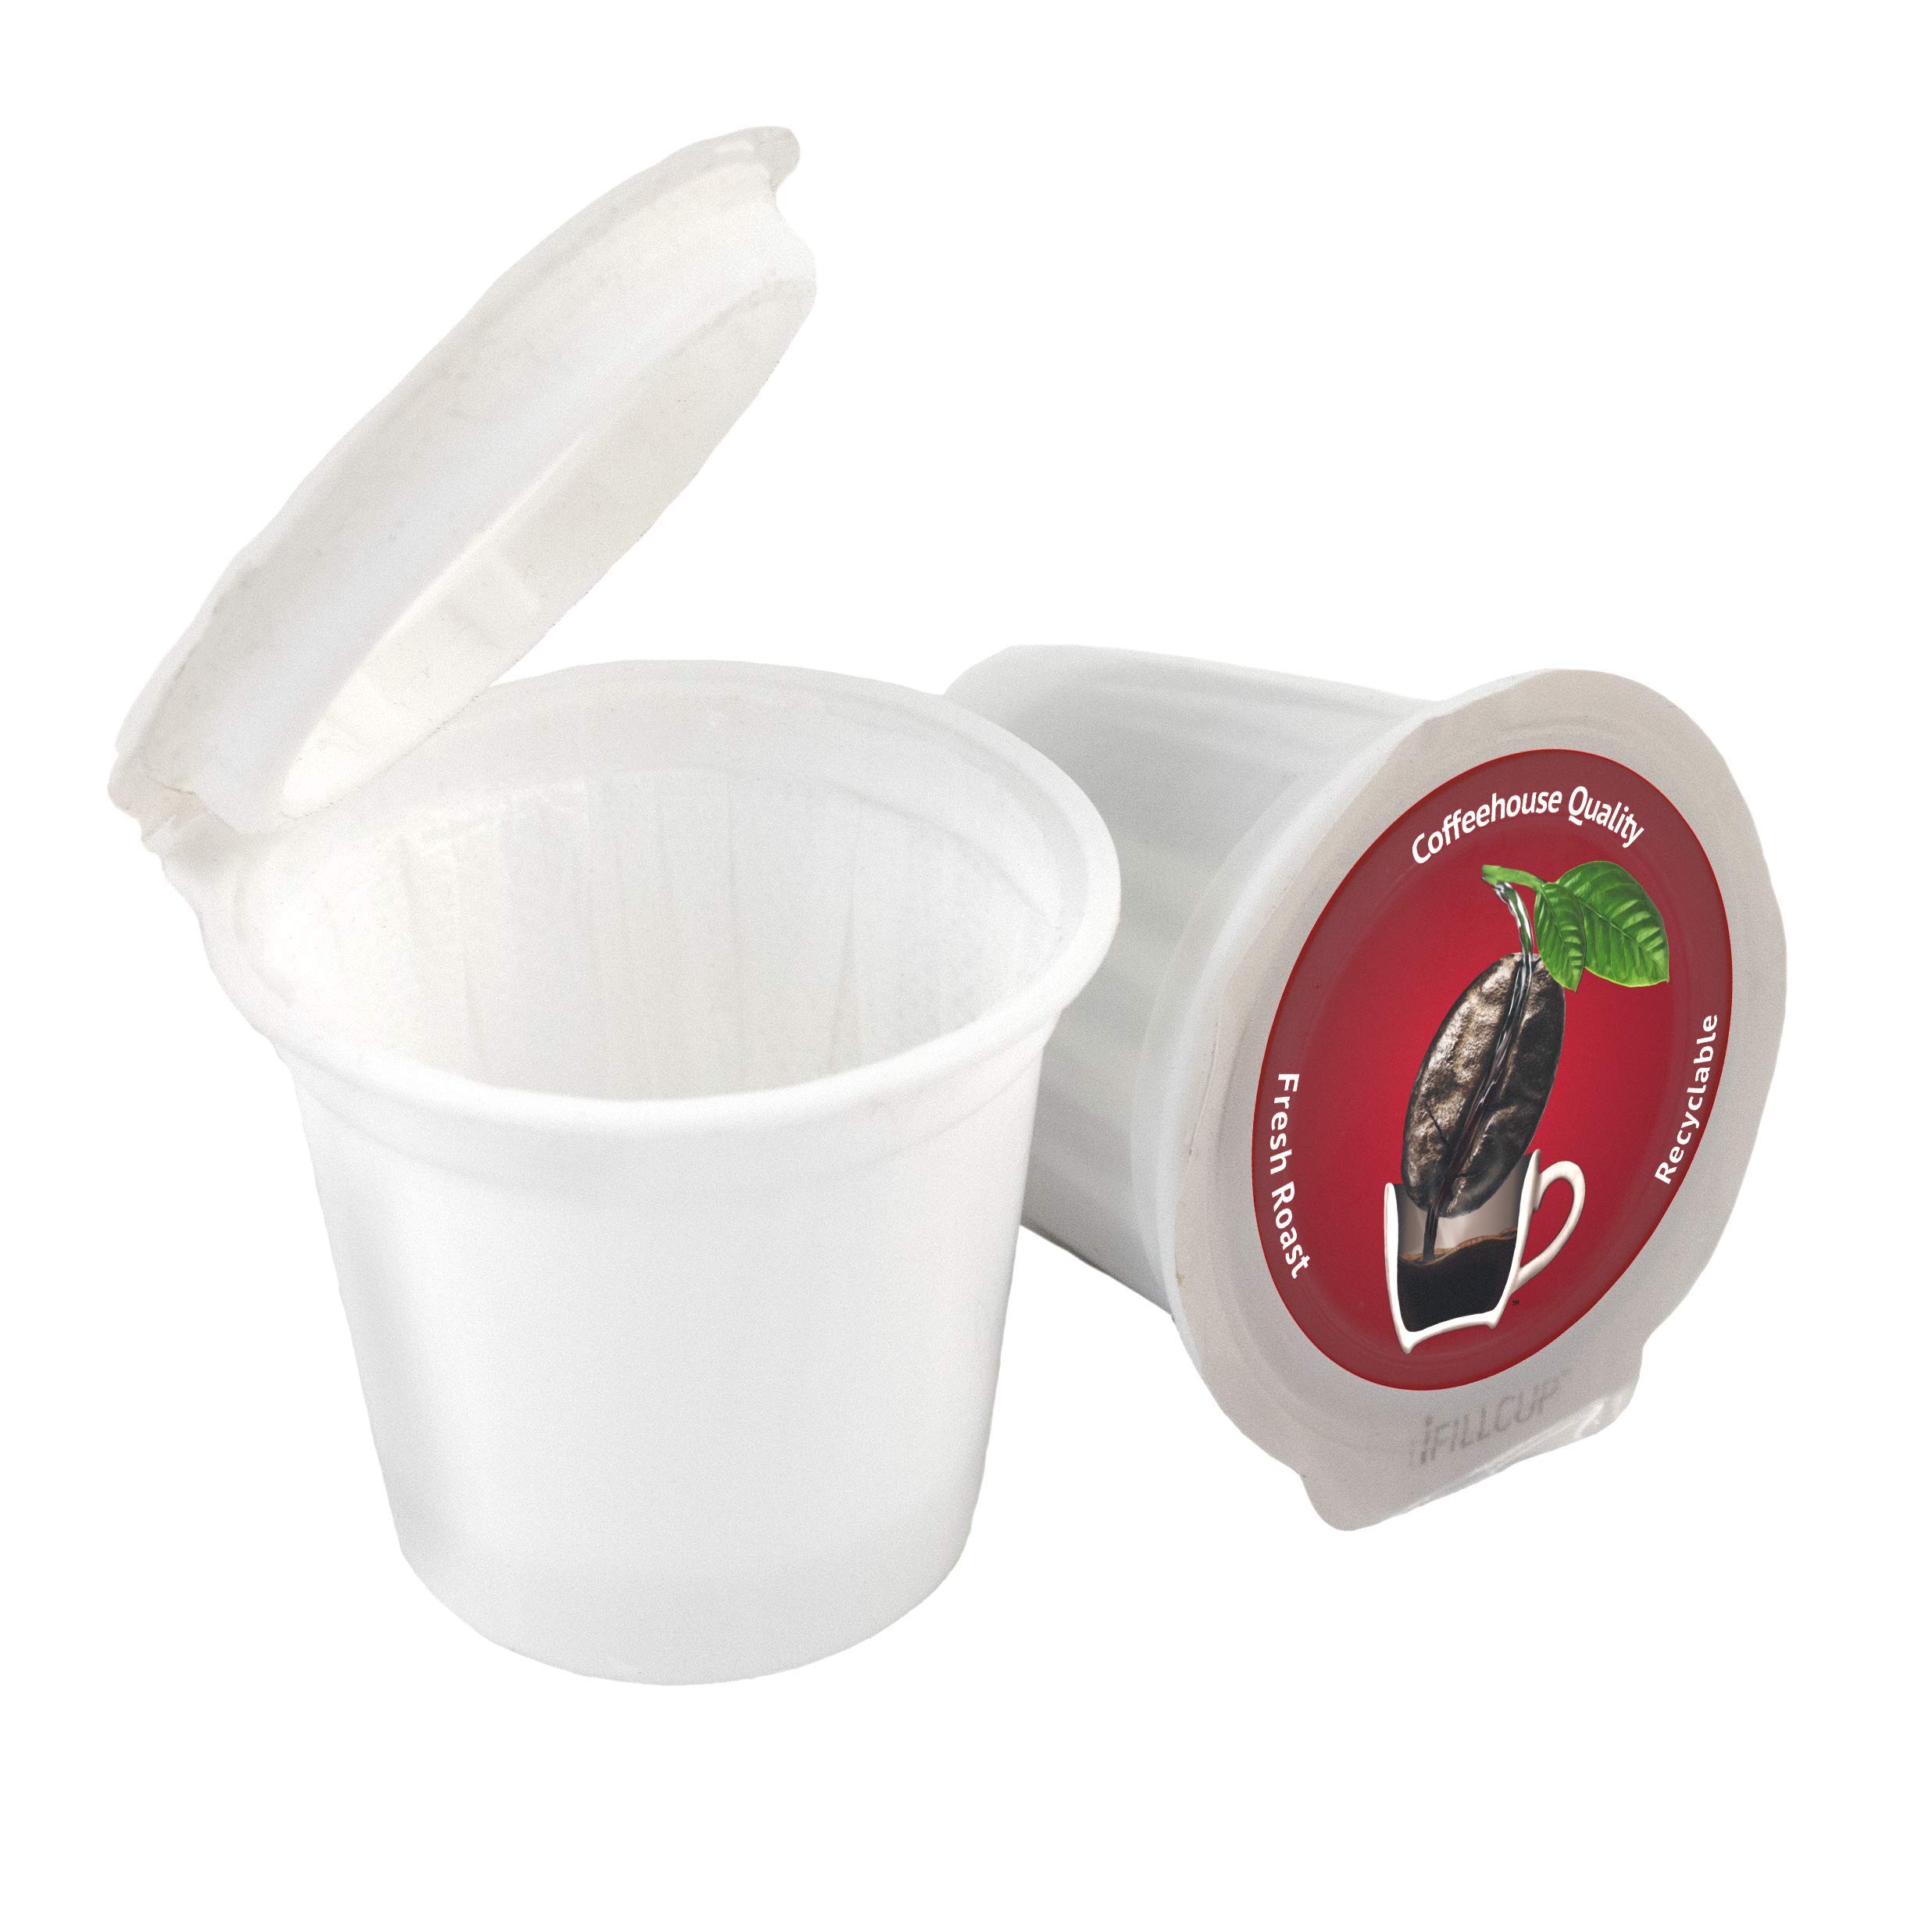 iFillCup, 42 Count Red - iFillCup, fill your own Empty Single Serve Pods. Eco friendly 100% recyclable pods for use in all k cup brewers including 1.0 & 2.0 Keurig. Airtight to seal in freshness.